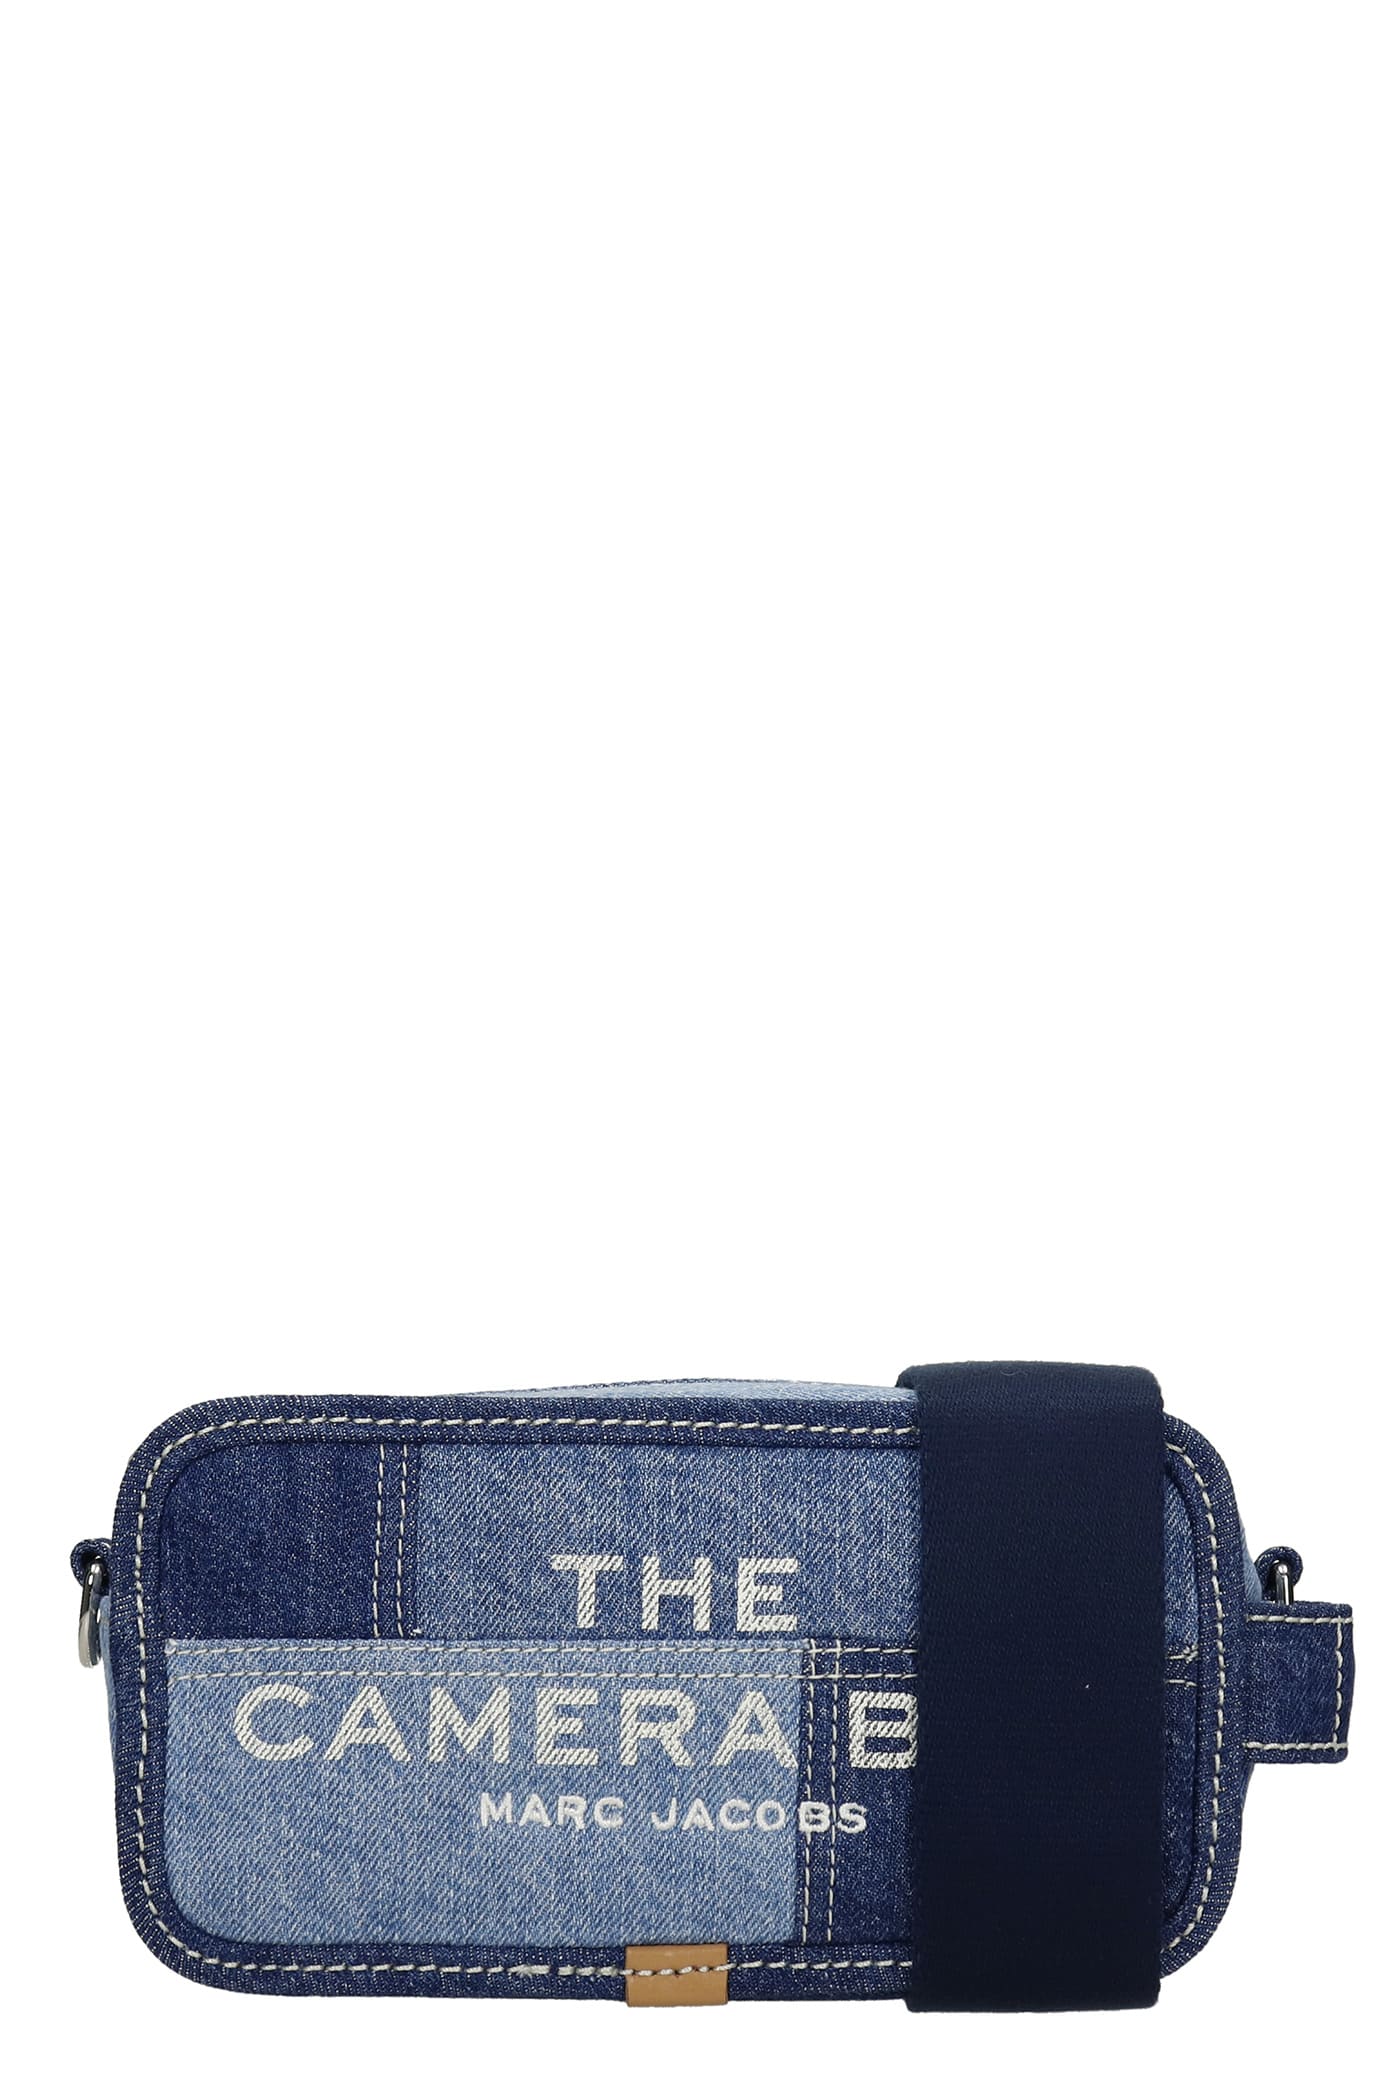 Marc Jacobs The Camera Bag Waist Bag In Blue Cotton